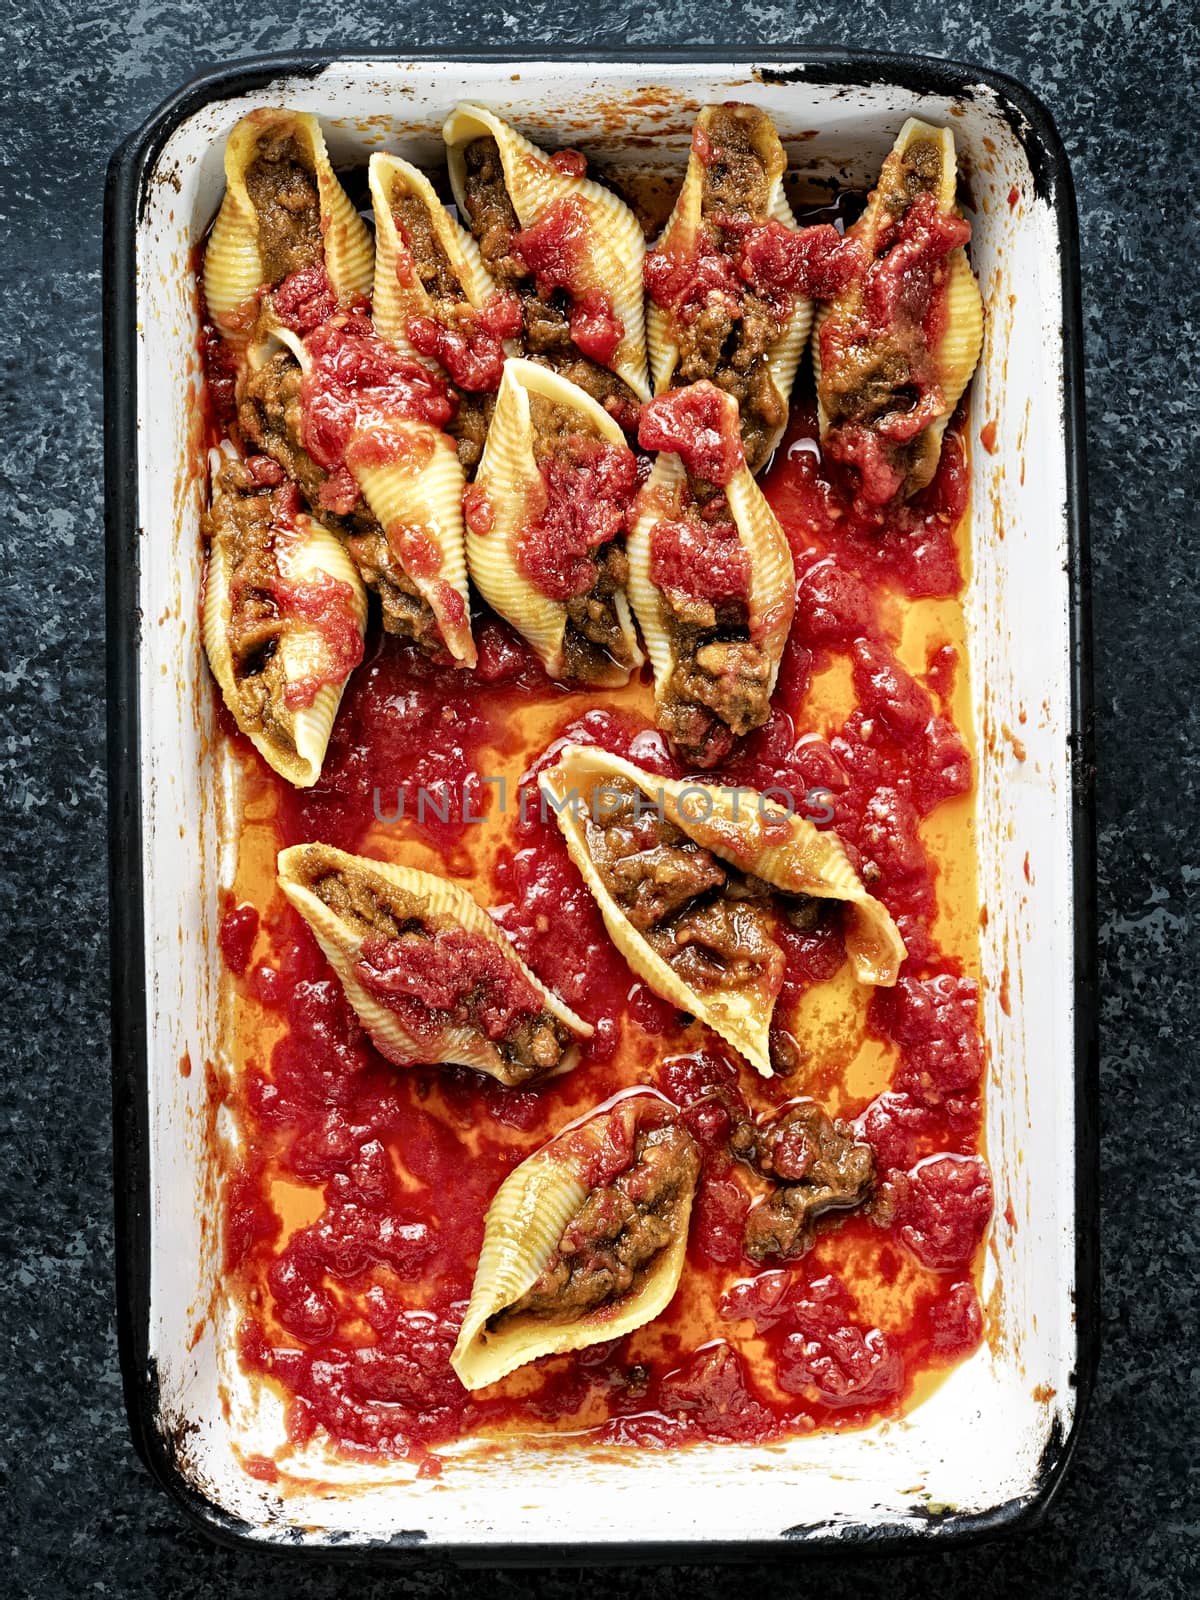 rustic italian stuffed conchiglie pasta by zkruger